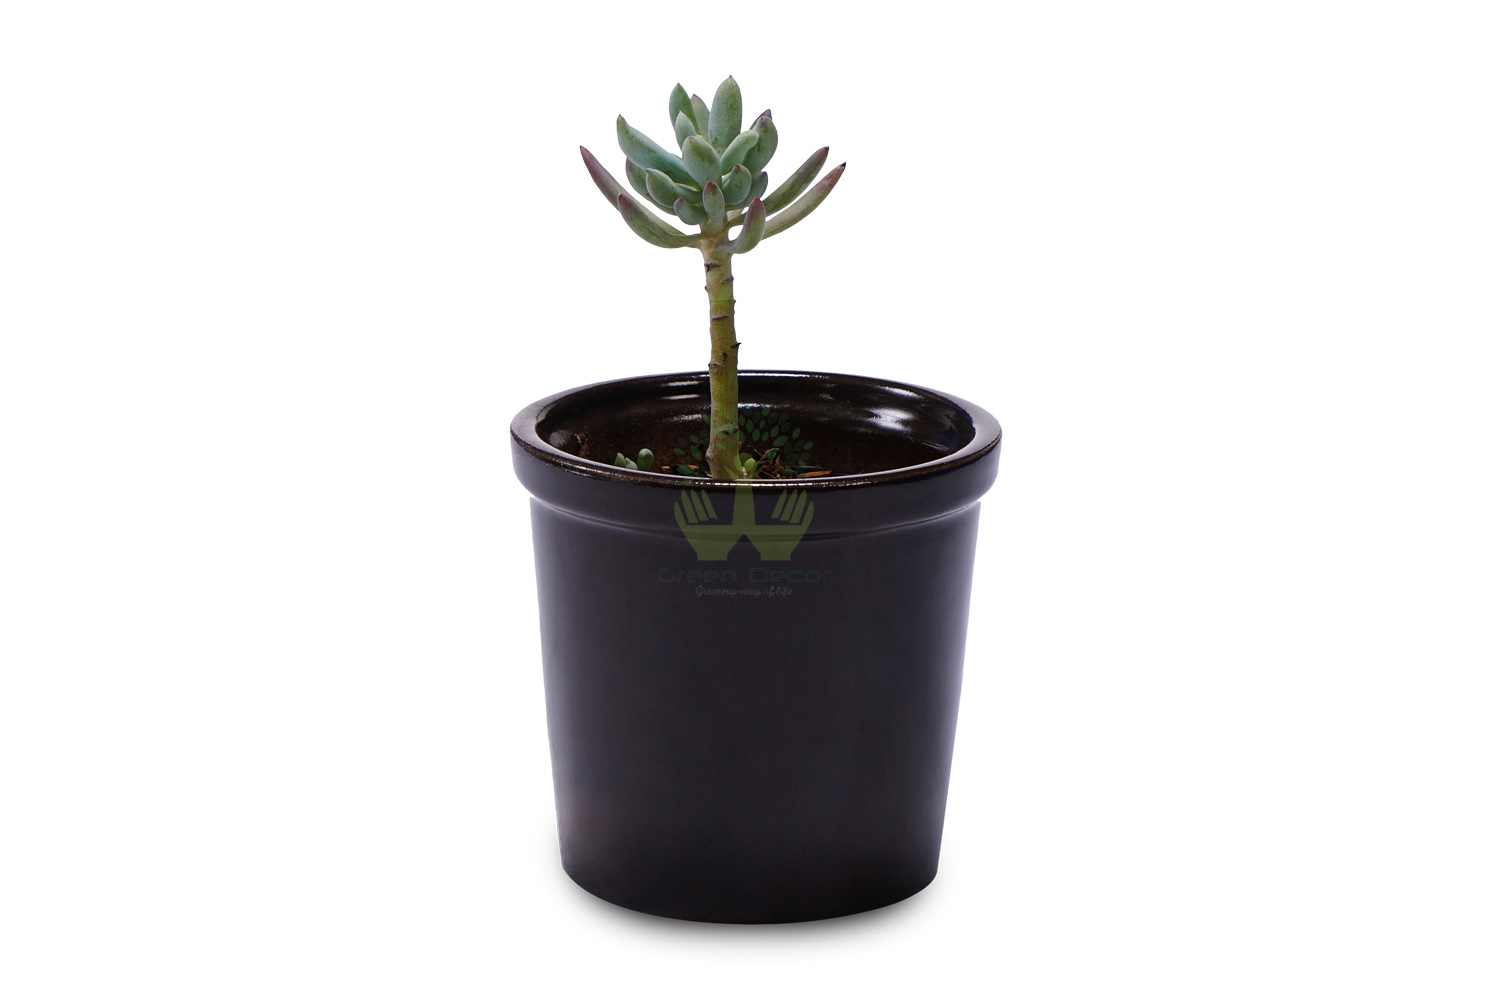 Buy Sedum Adolphi Plants , White Pots and seeds in Delhi NCR by the best online nursery shop Greendecor.